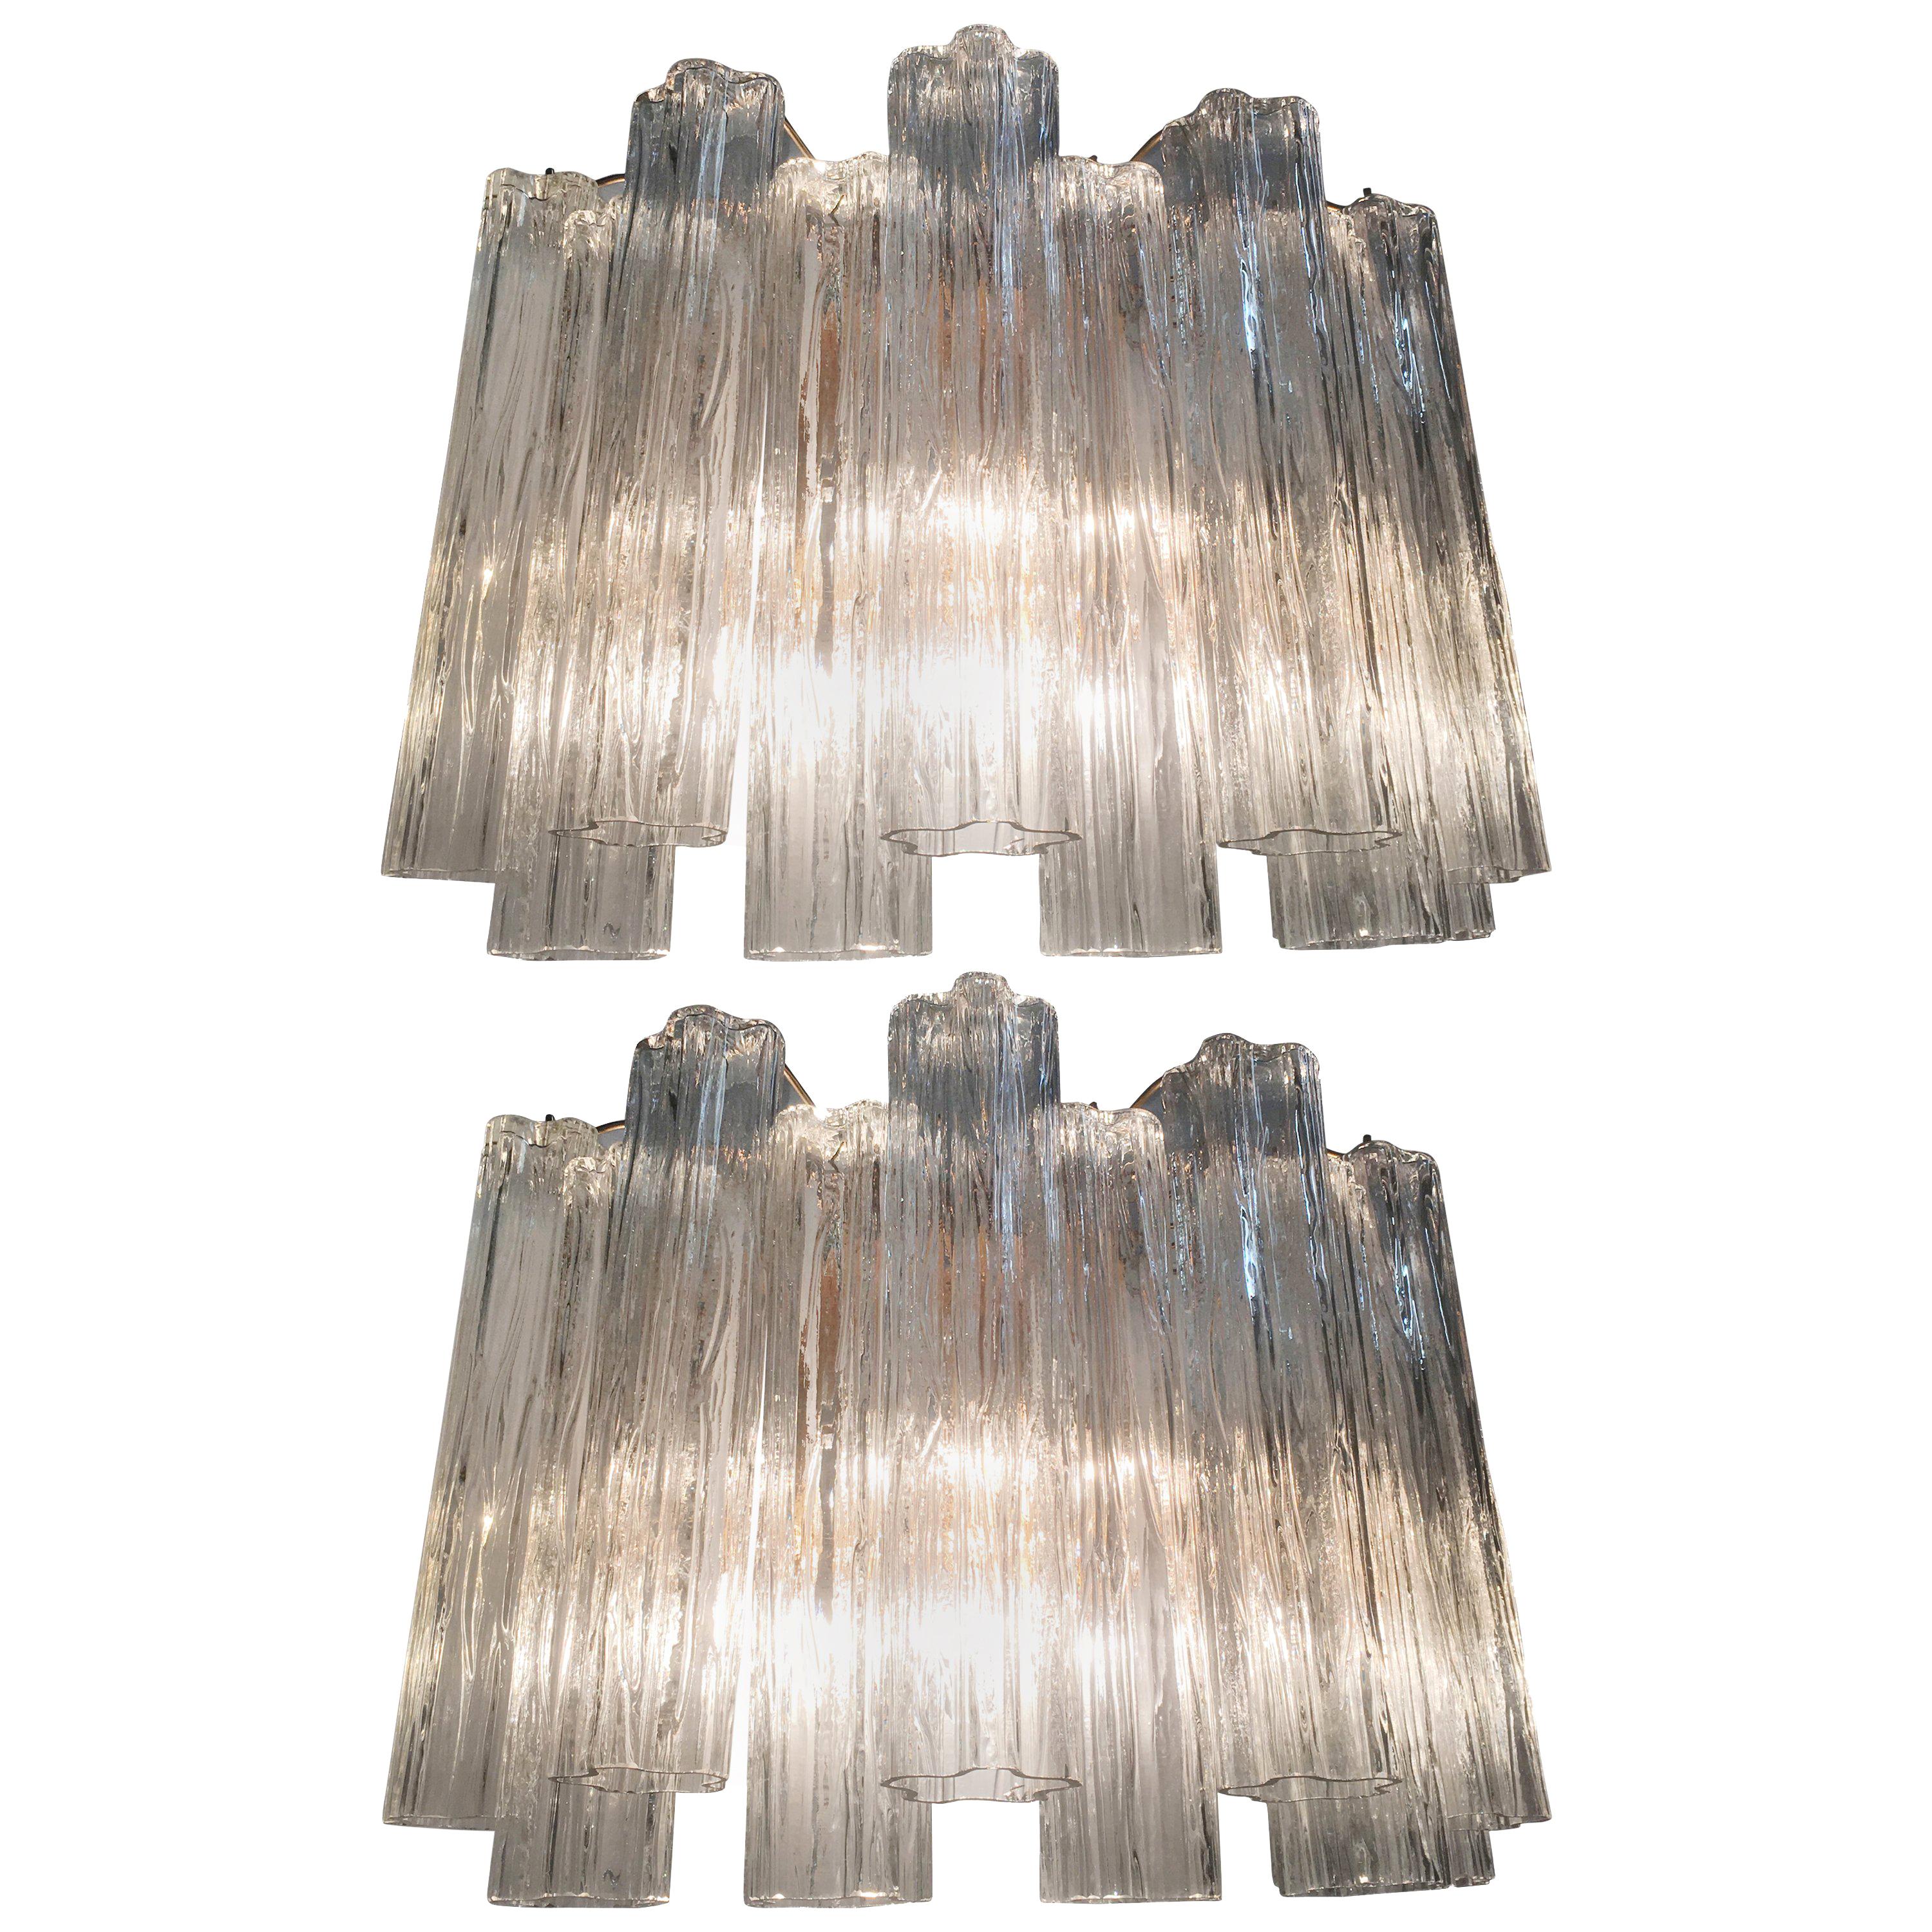 Pair of Venini Tronchi Sconces or Wall Lights by Toni Zuccheri, 1970s For Sale